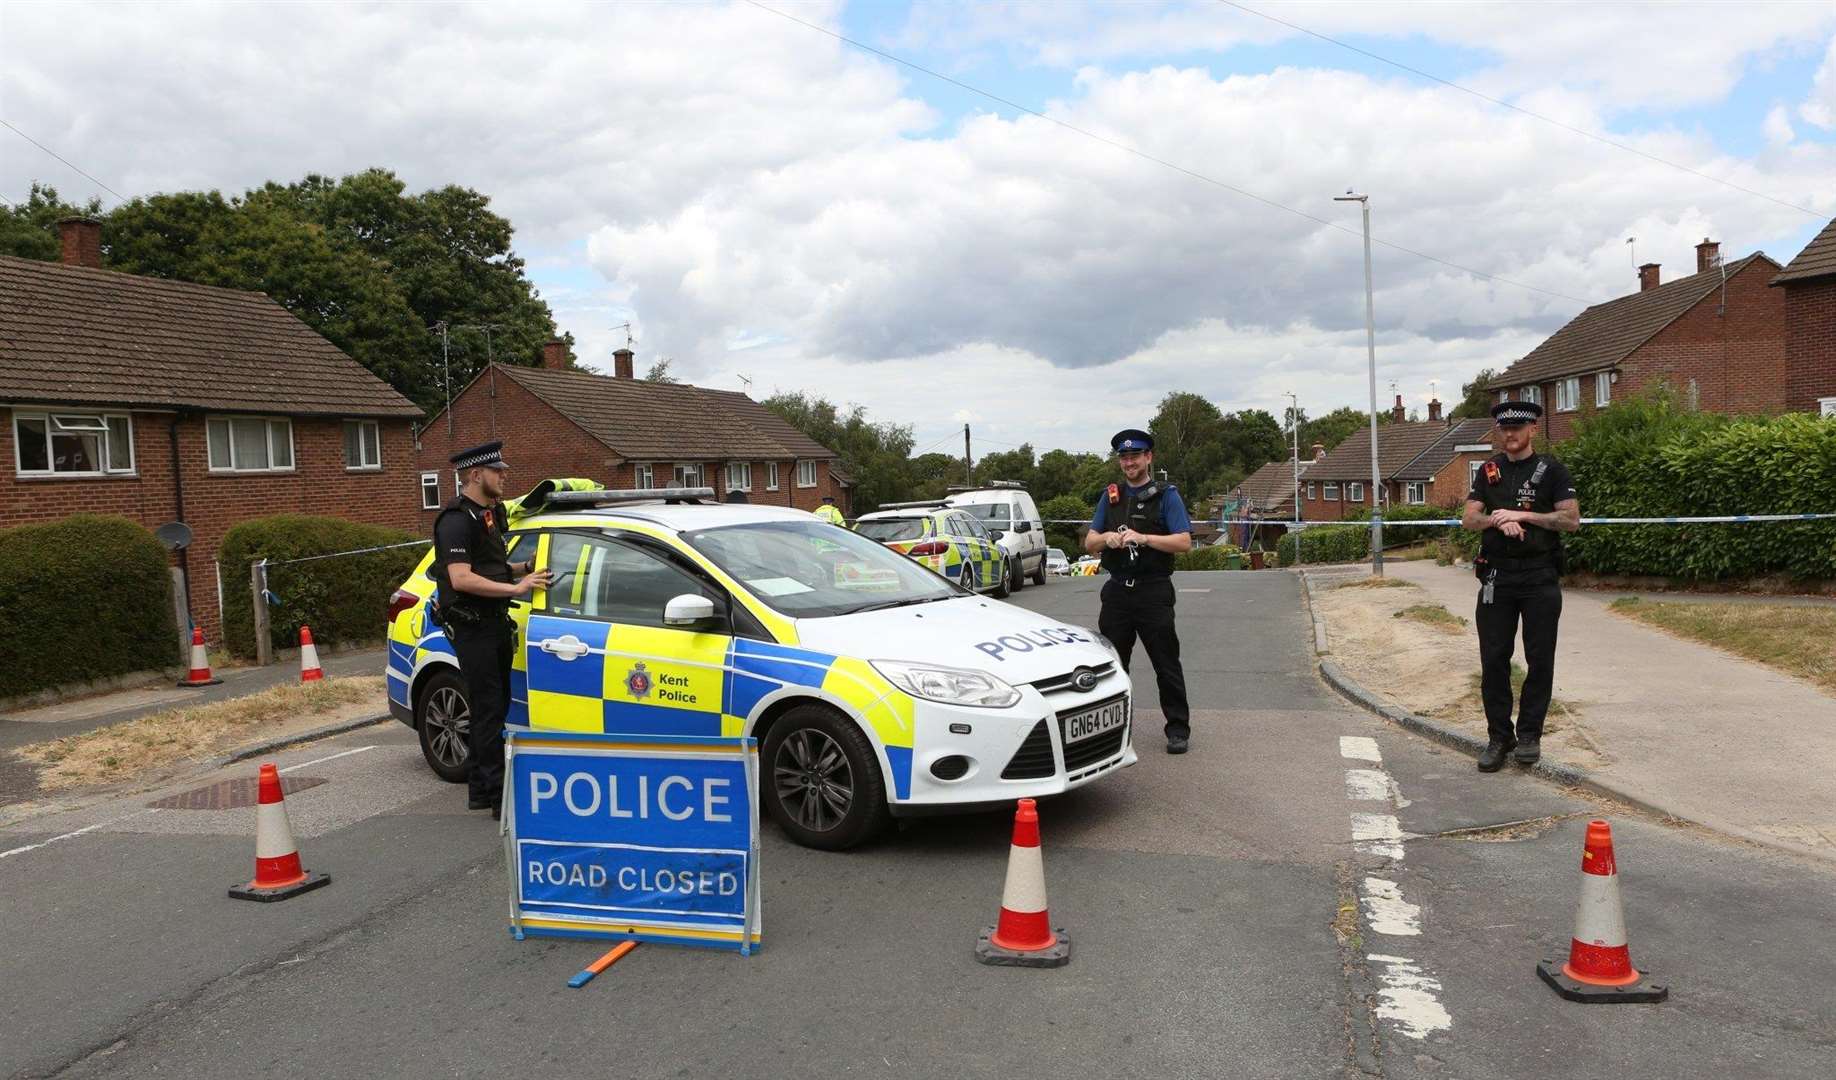 Police have closed the road. Image: UK News in Pictures (3120087)